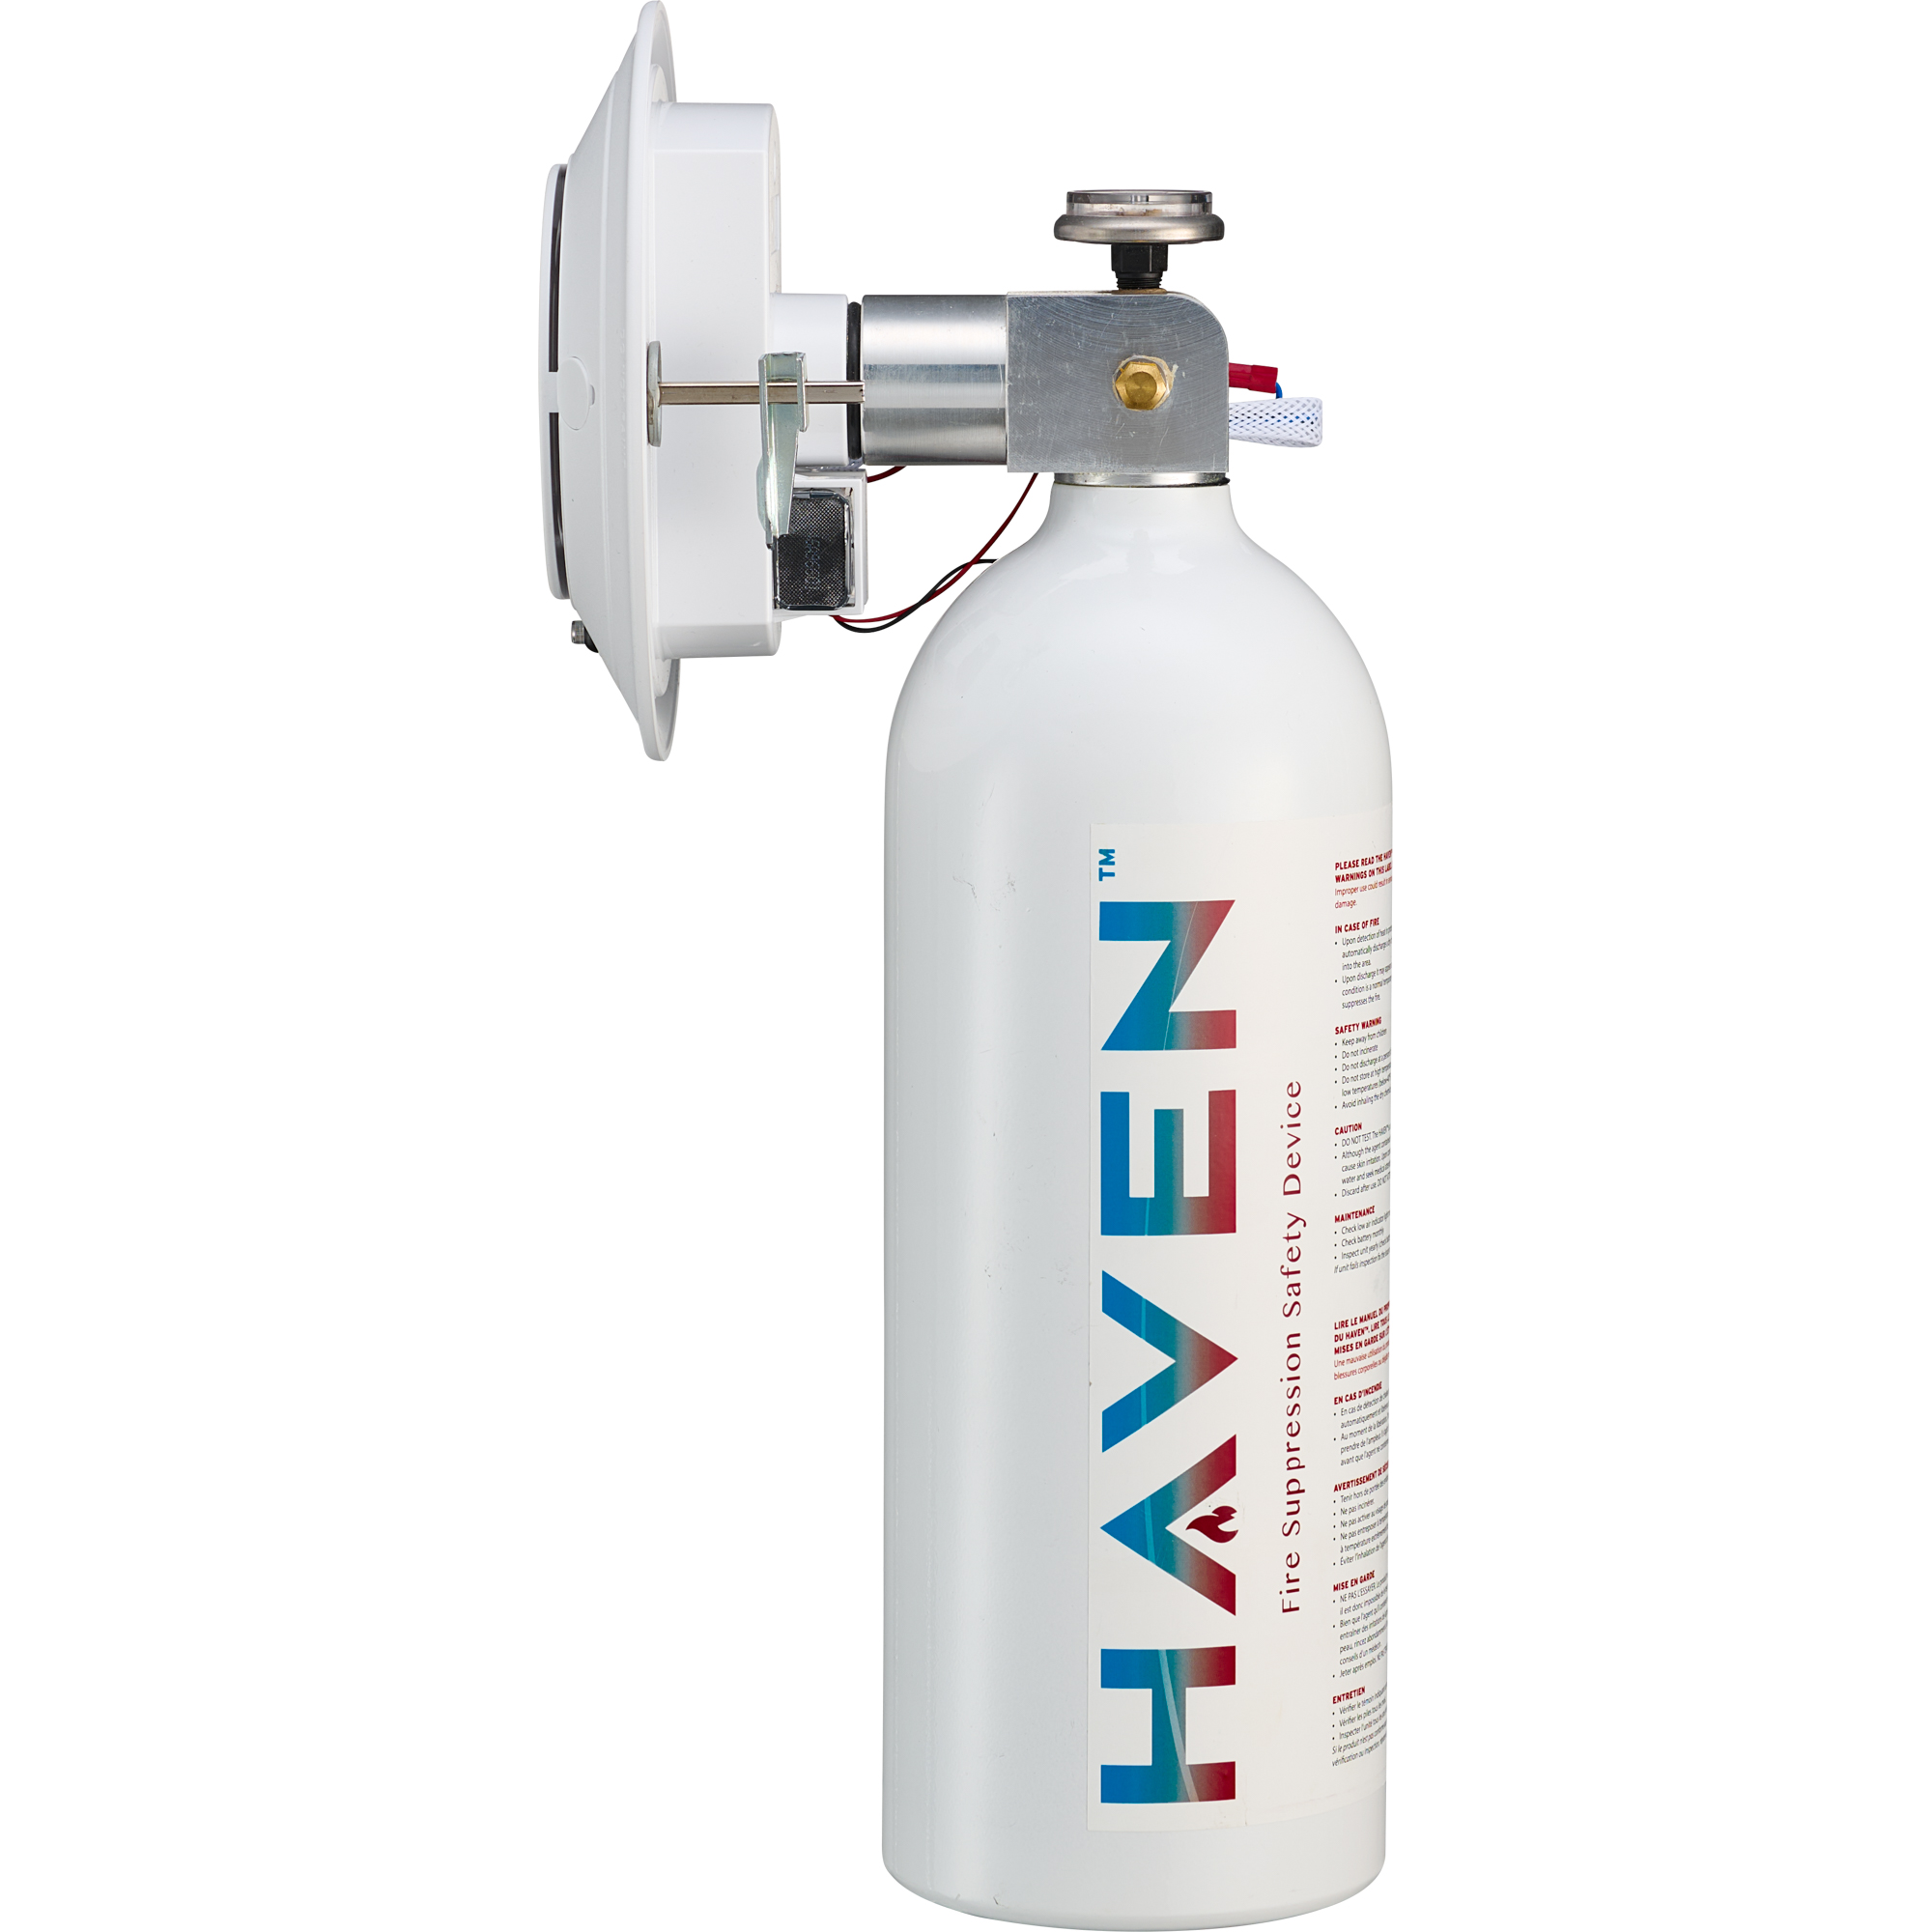 HAVEN Fire Suppression Safety Device 135F - 57C Rated